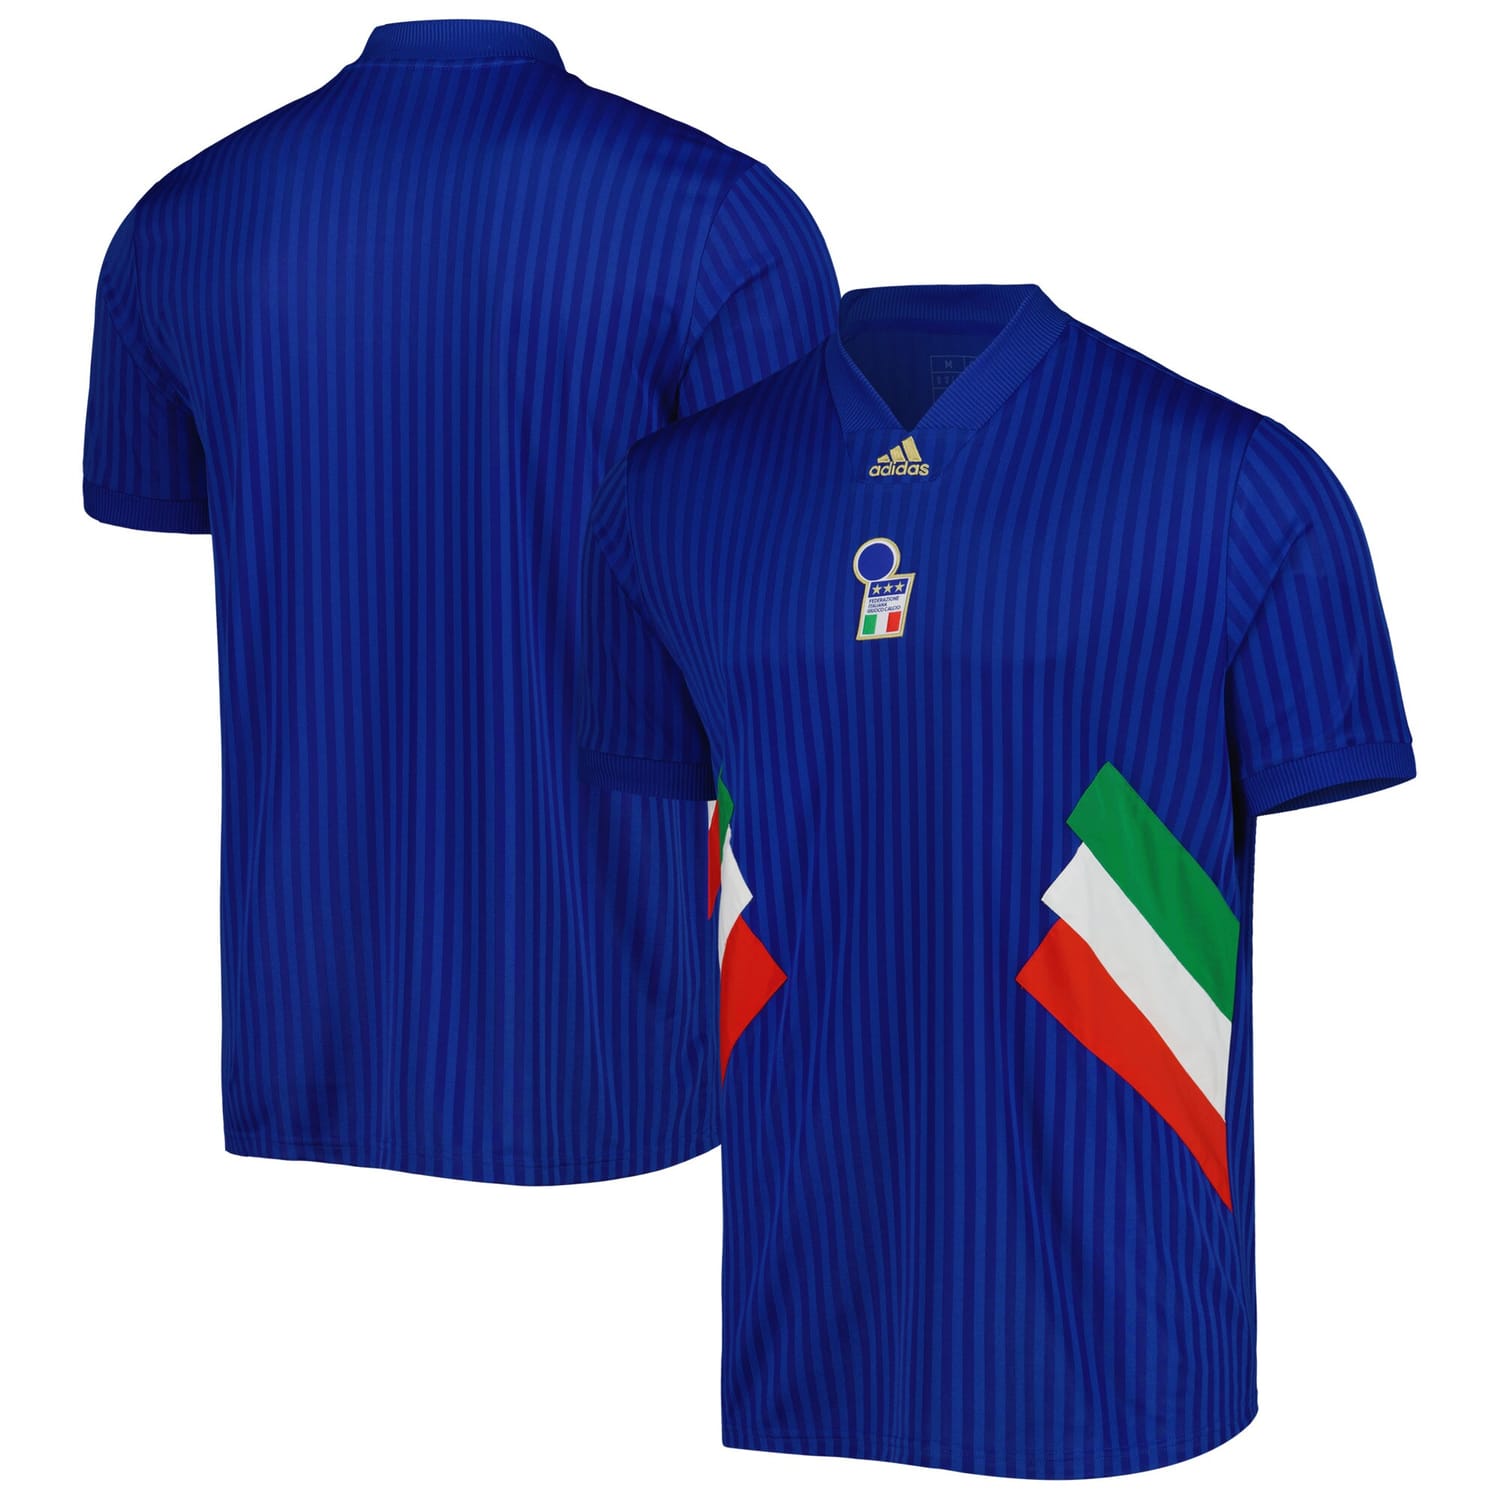 Italy National Team Jersey Shirt Blue for Men